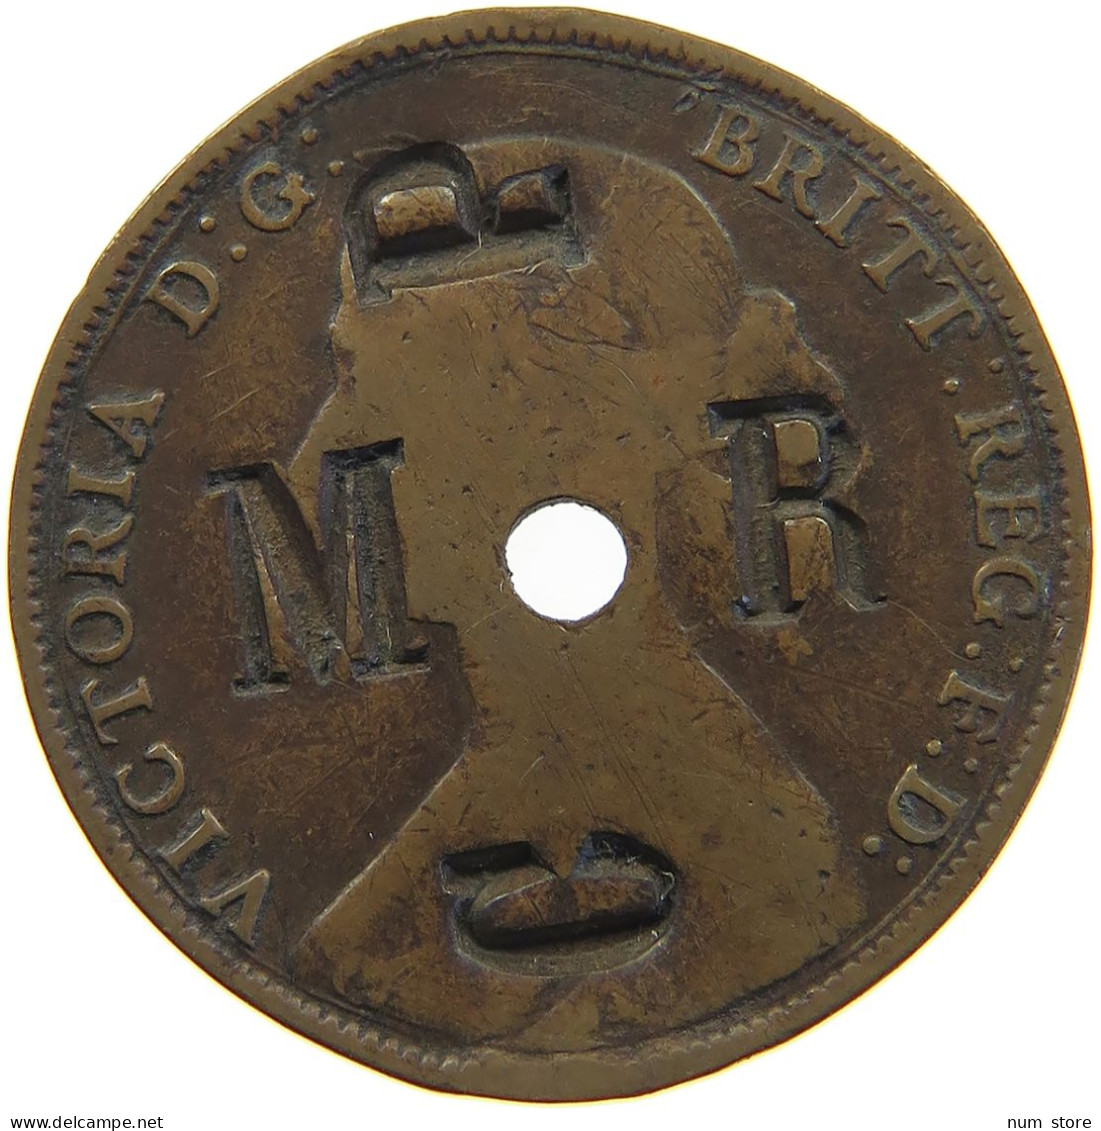 GREAT BRITAIN HALFPENNY 1860 Victoria 1837-1901 COUNTERMARKED MR-CP #c046 0329 - C. 1/2 Penny